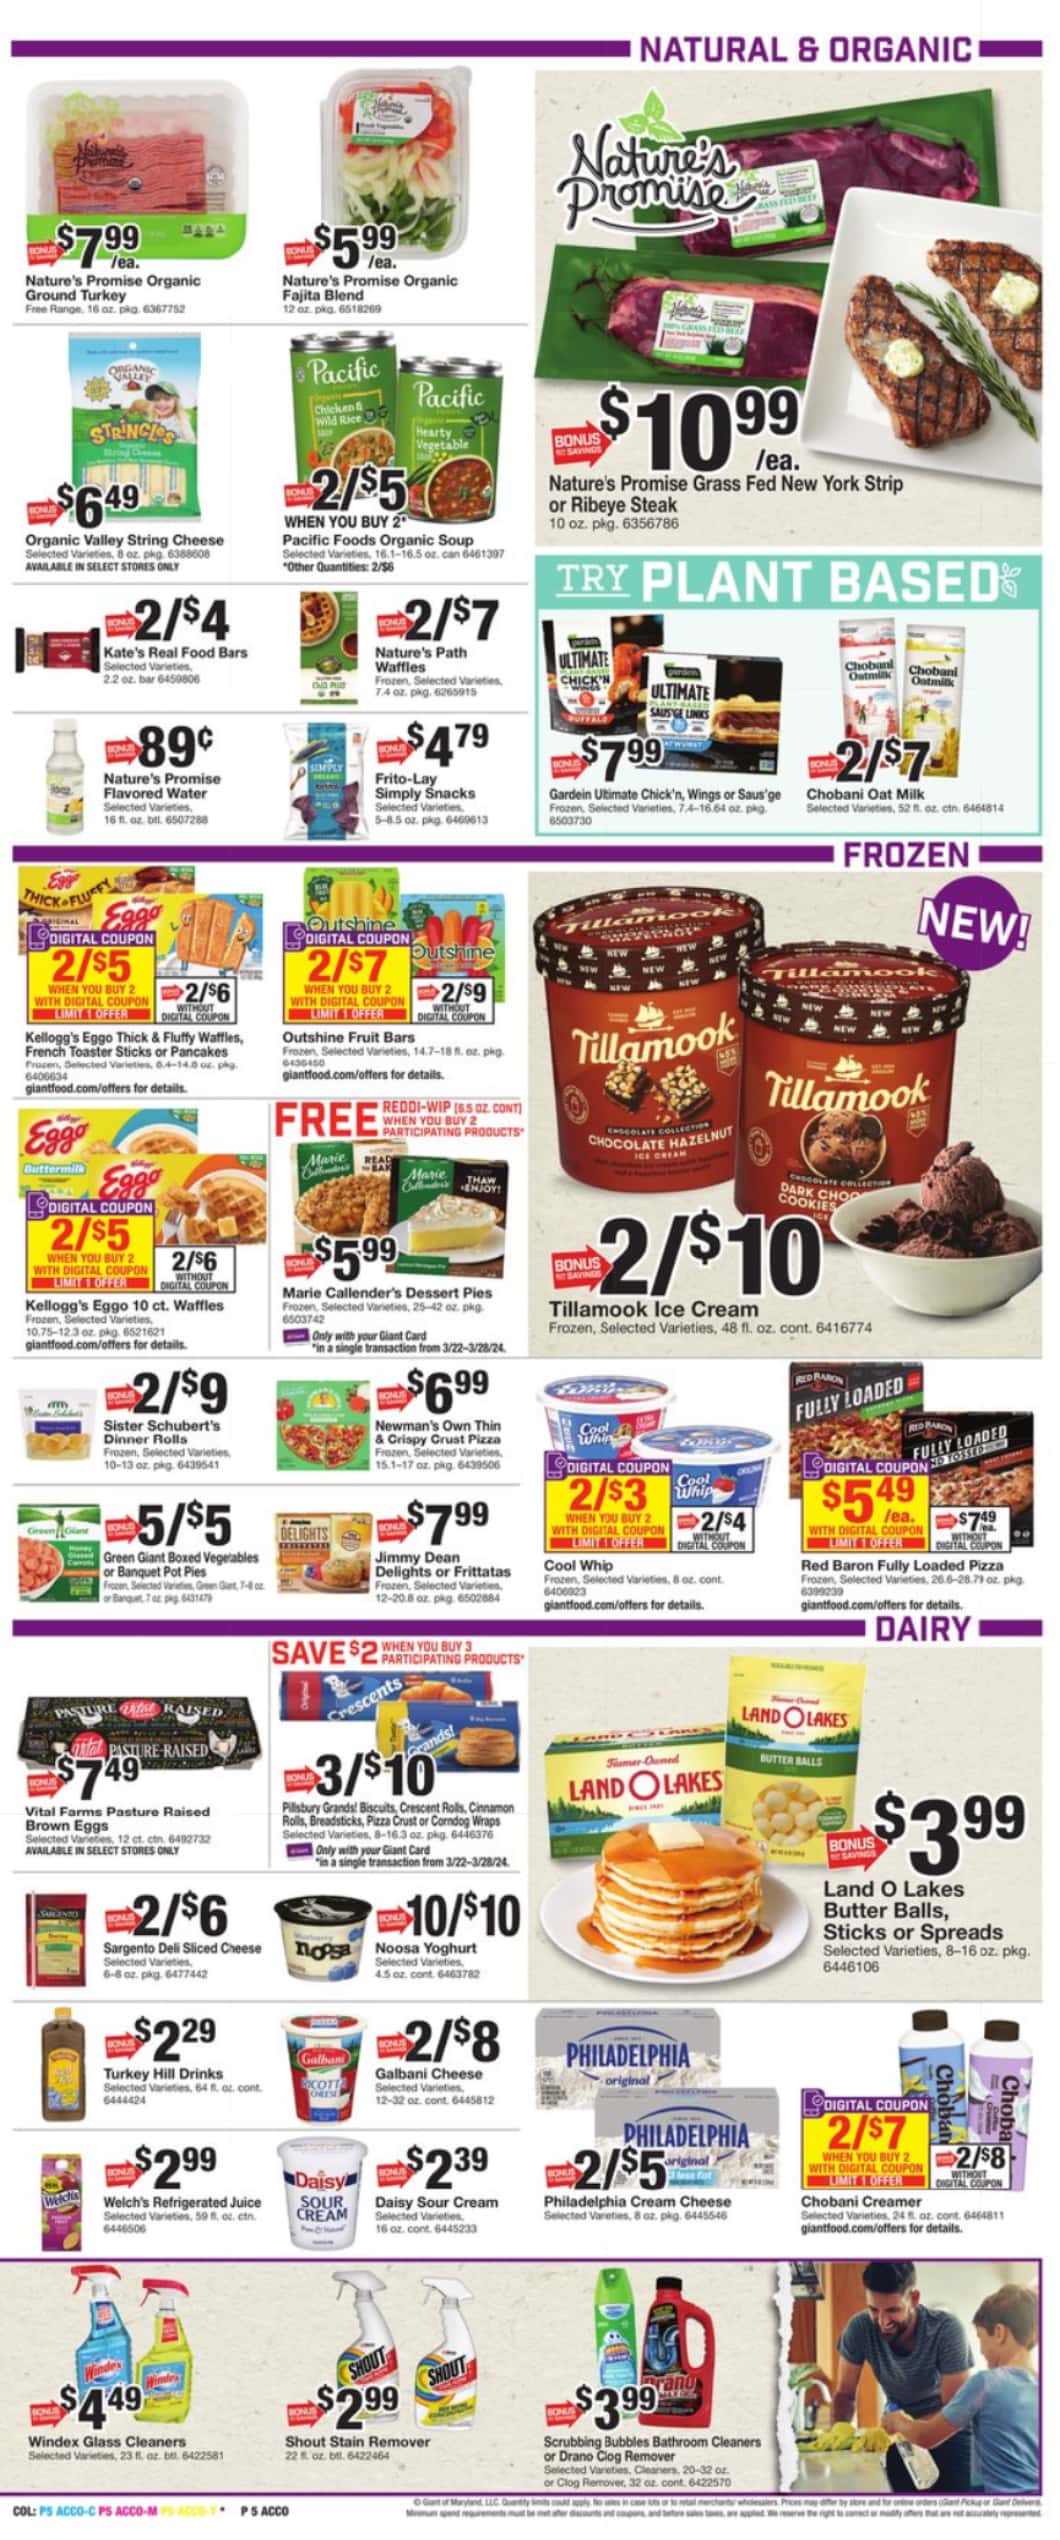 Giant_weekly_ad_032224_06